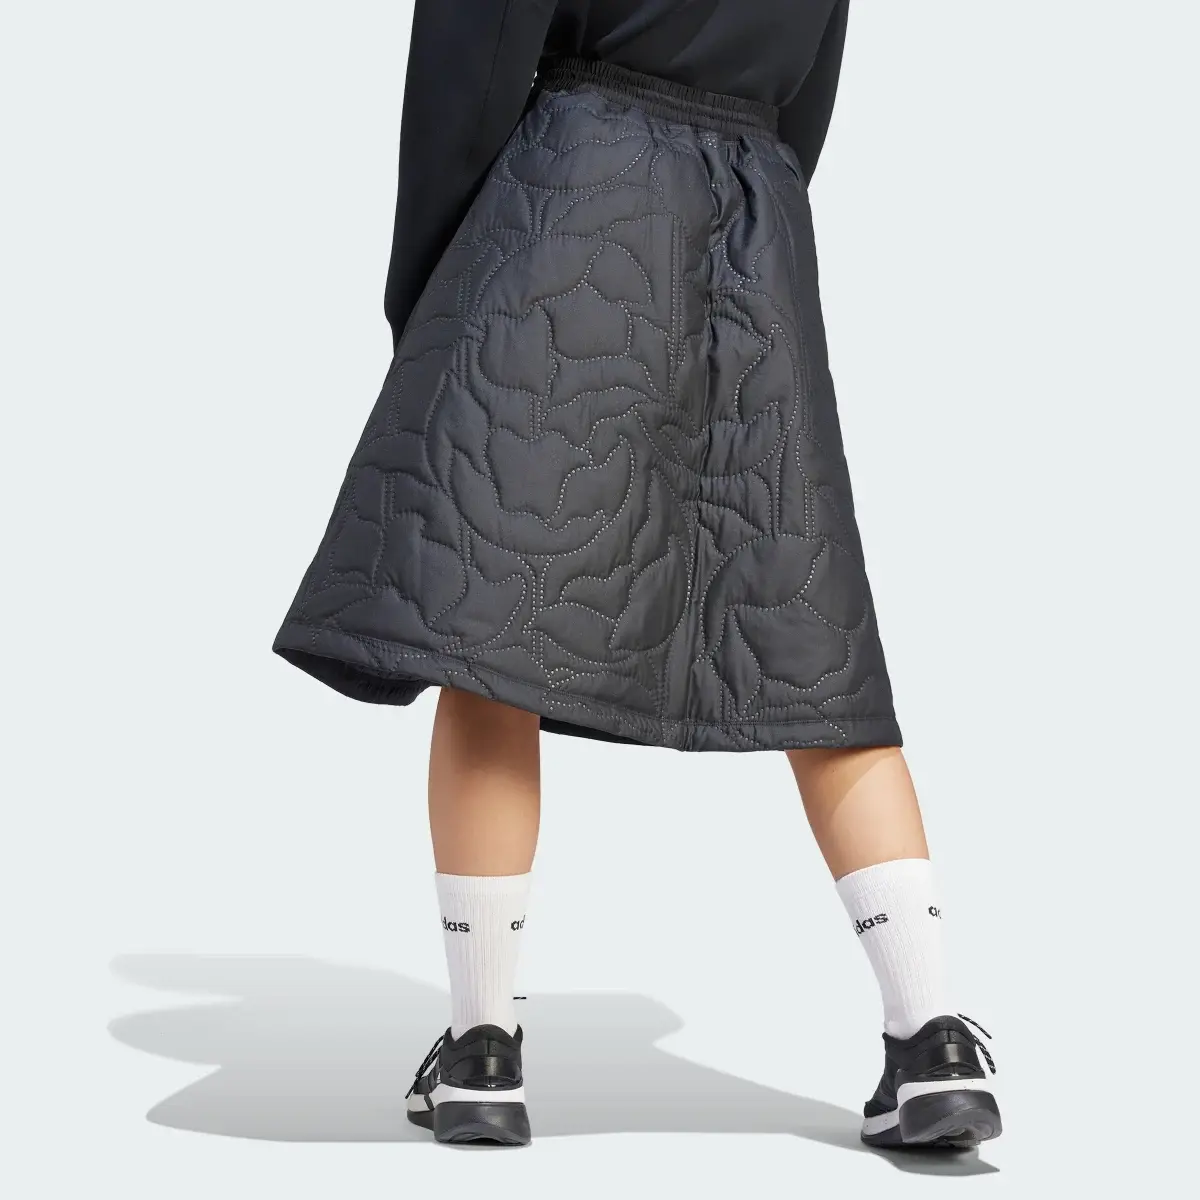 Adidas City Escape Quilted Skirt. 2